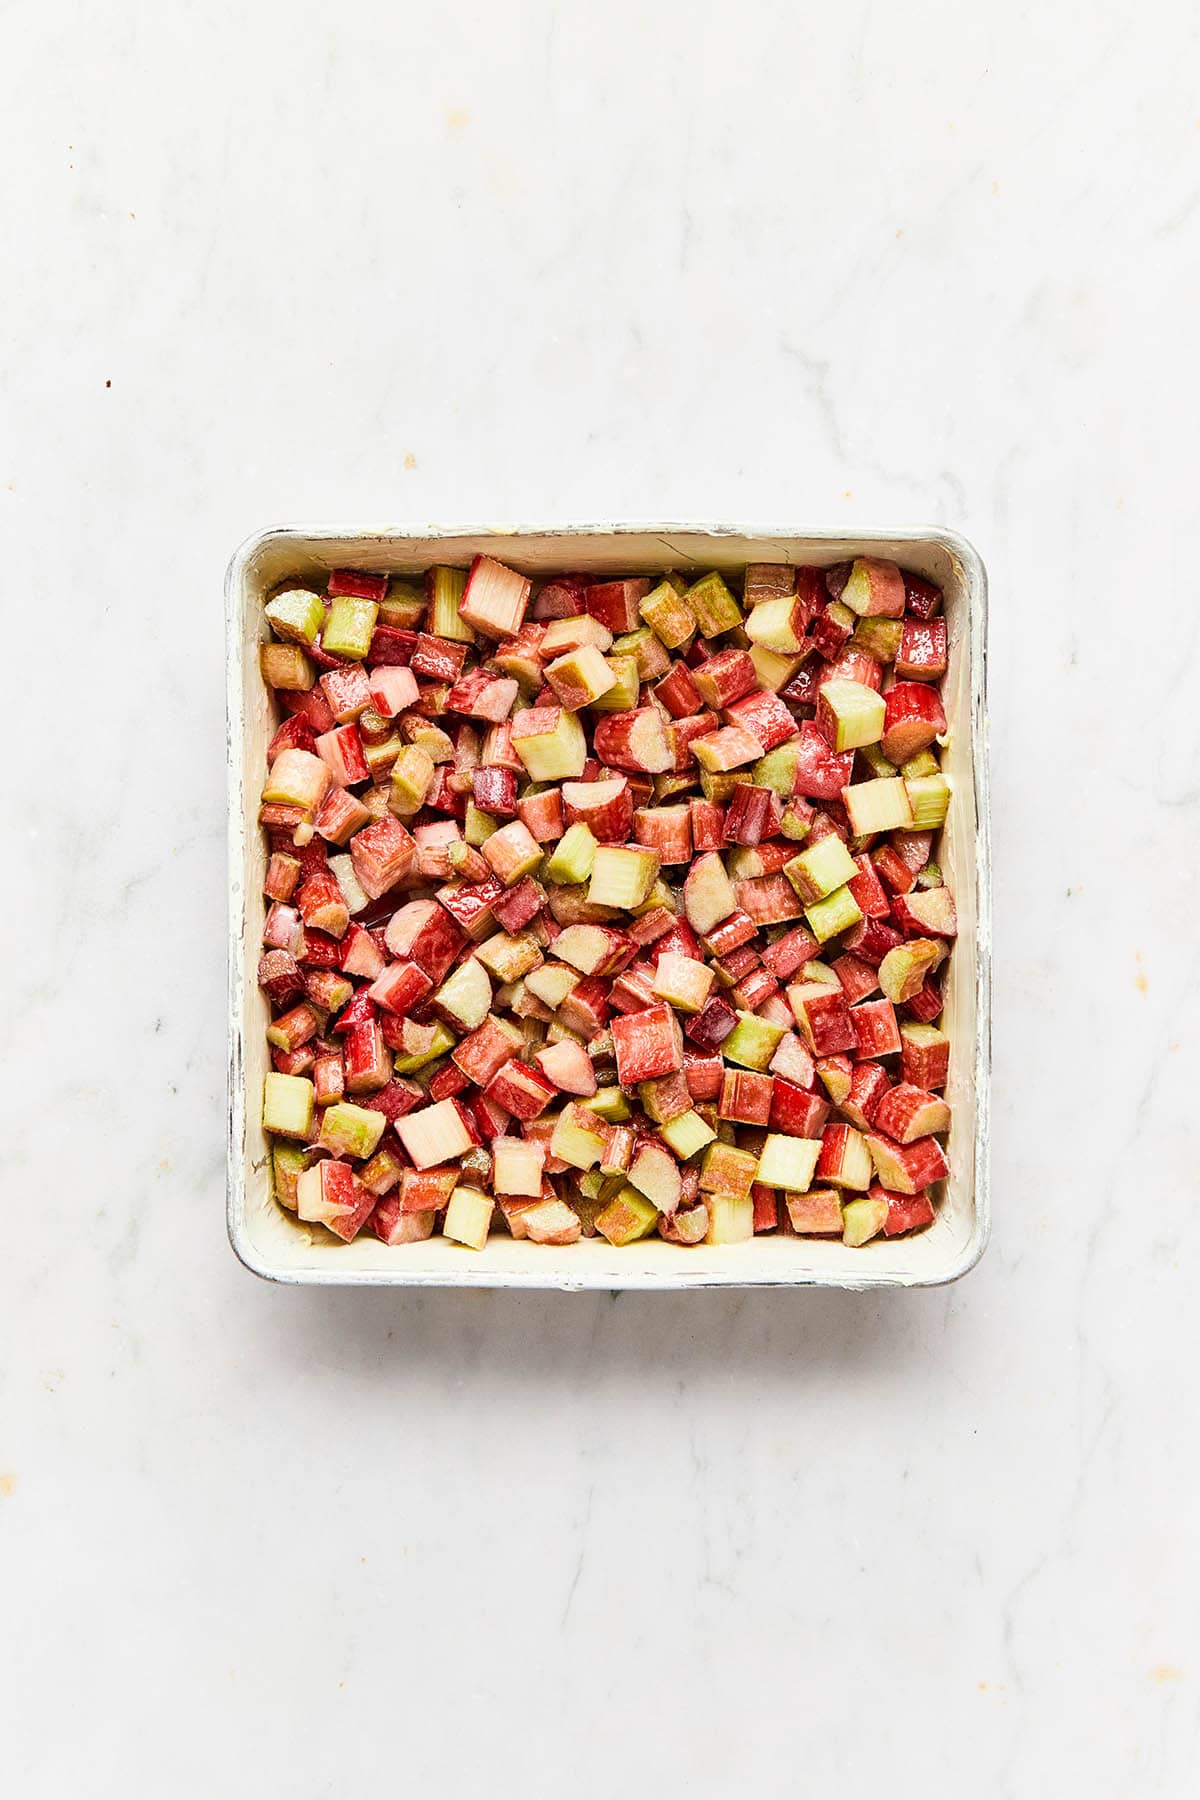 Chopped rhubarb in a square baking in.